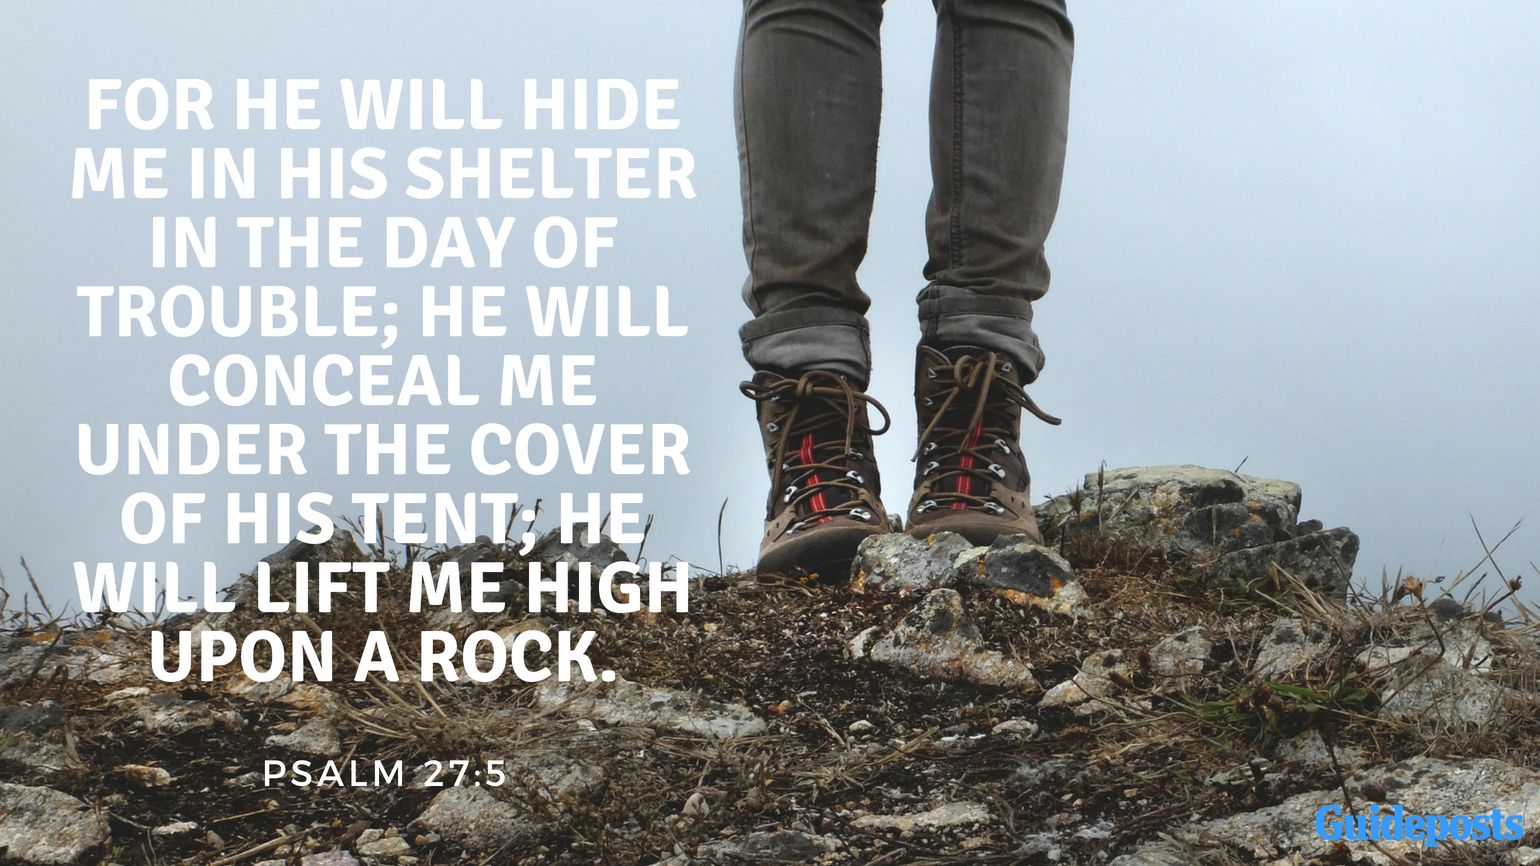 For he will hide me in his shelter in the day of trouble; he will conceal me under the cover of his tent; he will lift me high upon a rock. Psalm 27:5